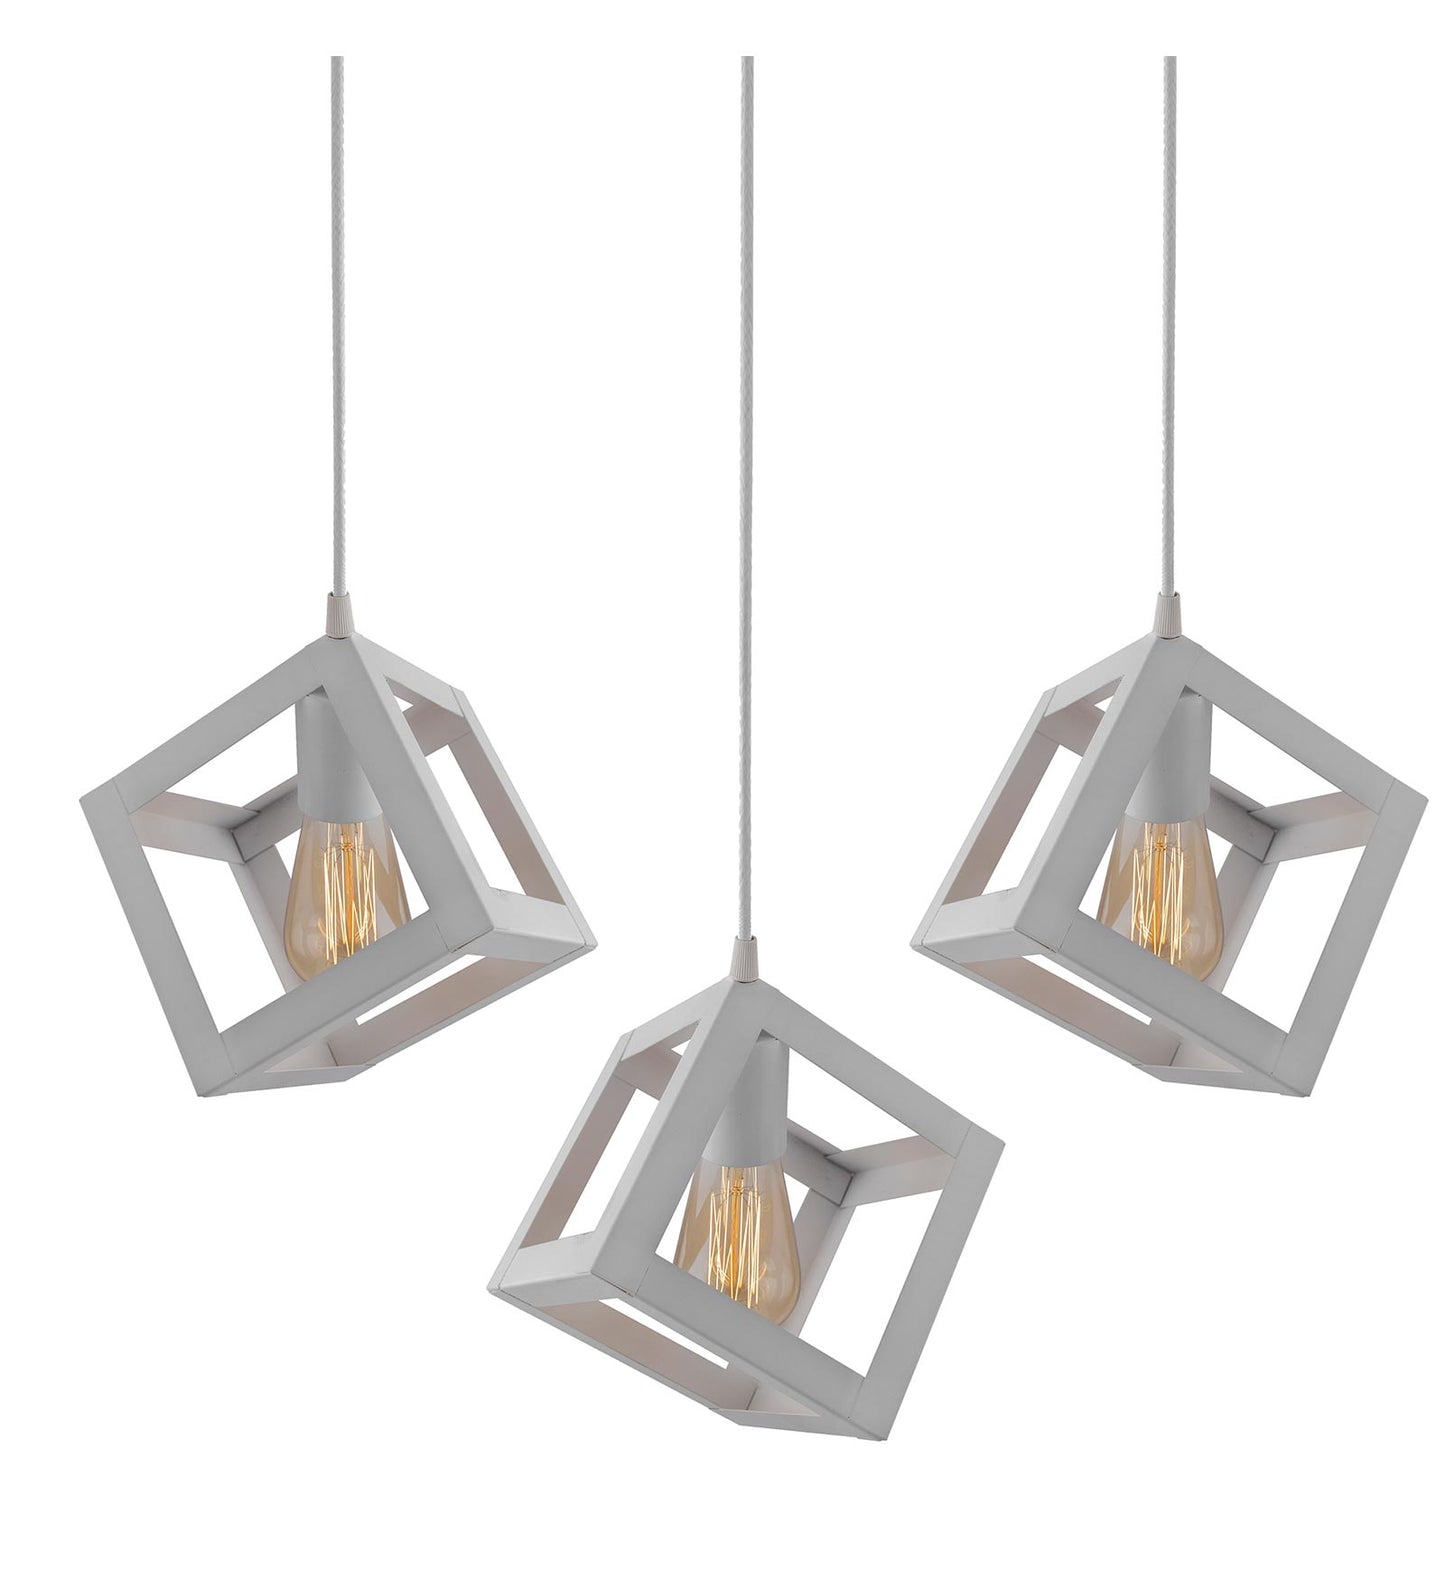 3-lights Linear Cluster Chandelier White Hanging Cube 6" Pendant Light, kitchen area and dining room light, bulb not included